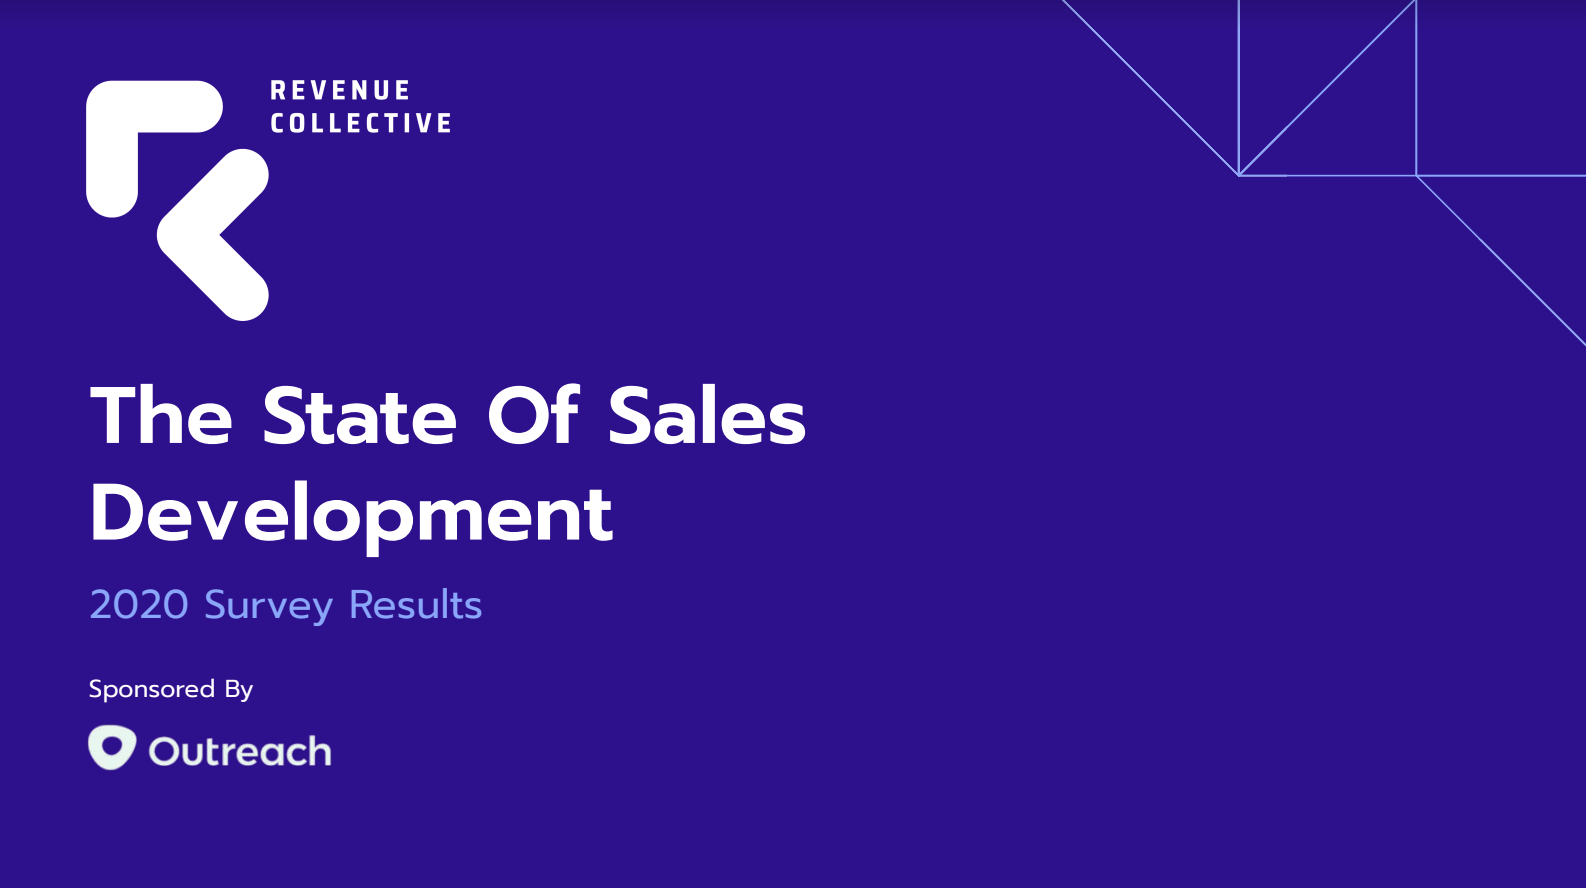 The State of Sales Development